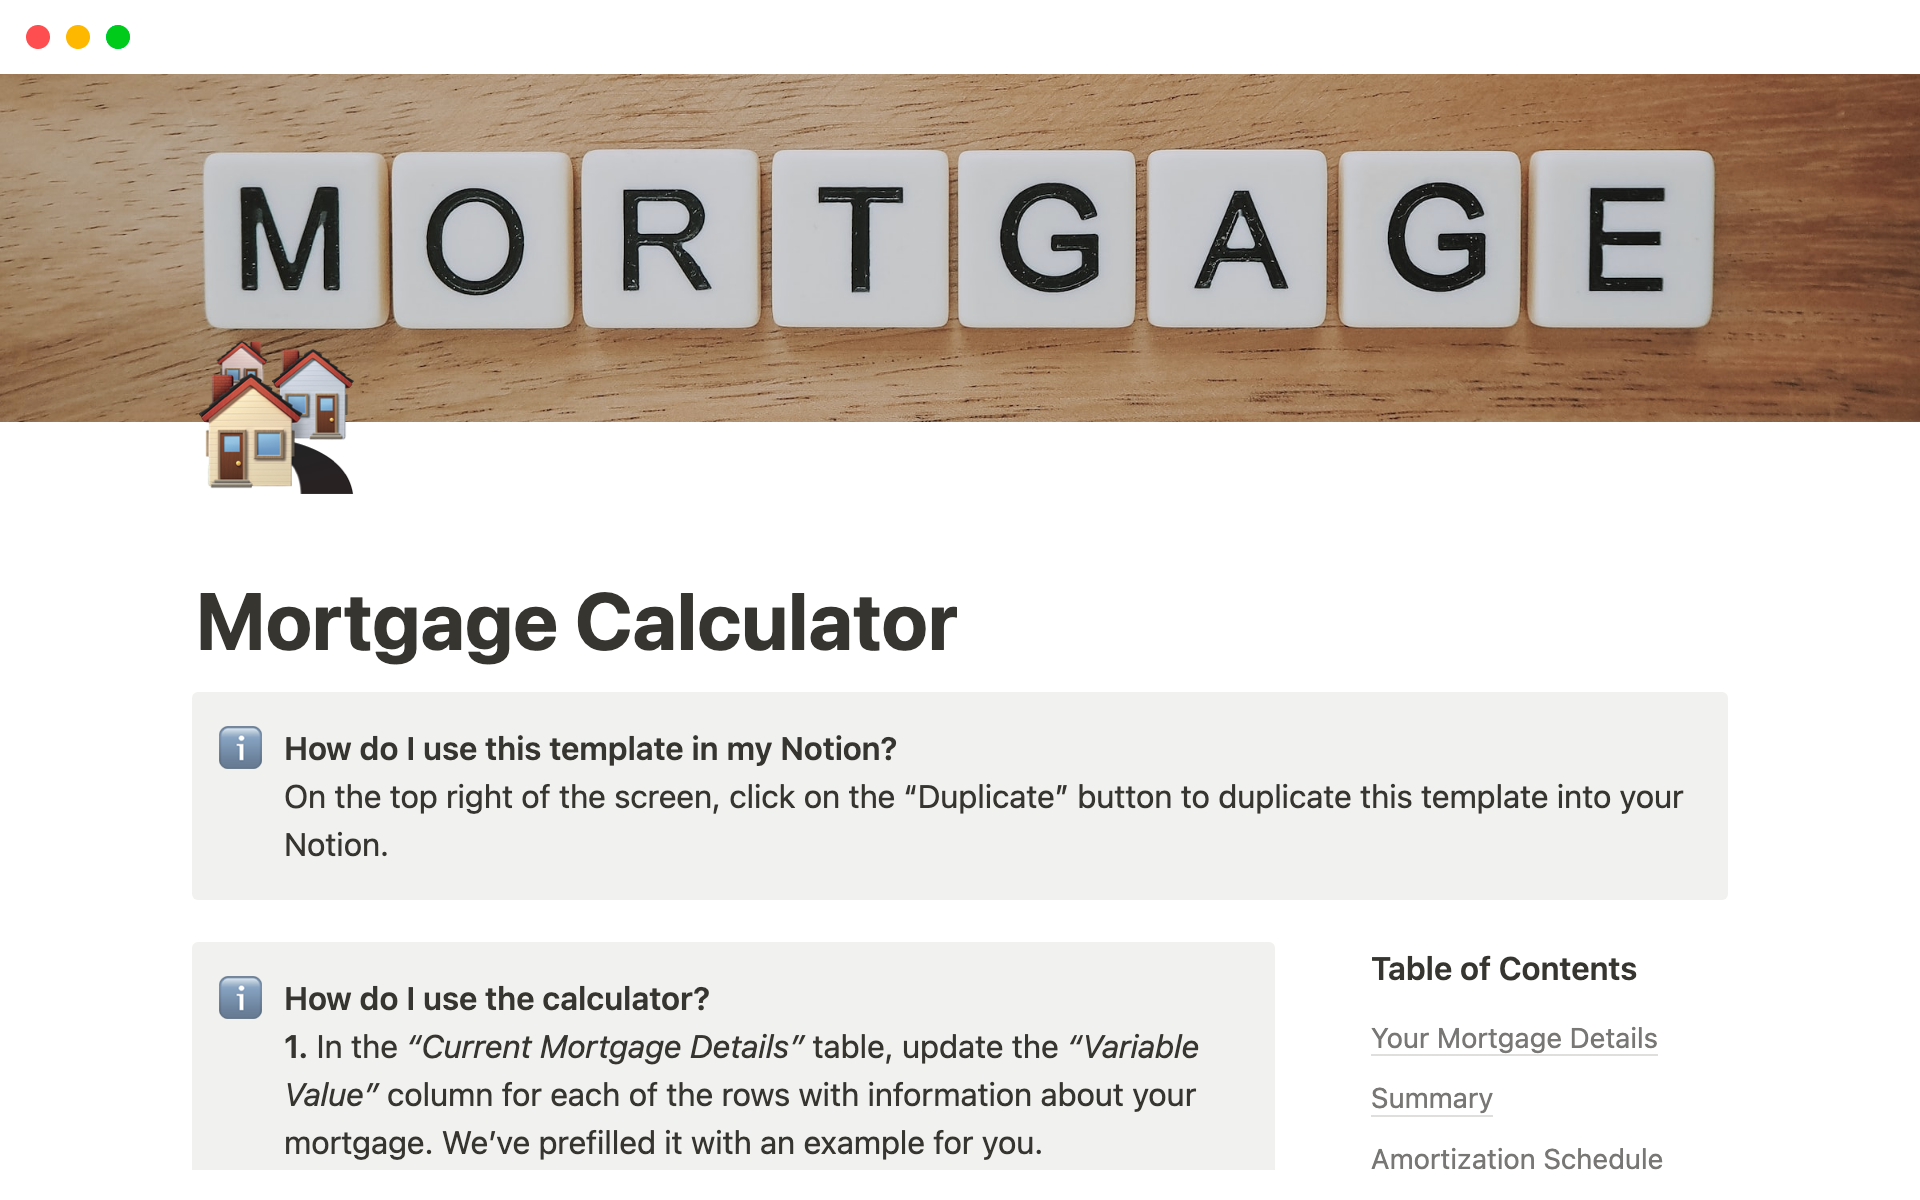 This Notion template helps you manage your mortgage by providing an amortization schedule and a high-level summary of your payments, interest, and principal, all in one convenient place.